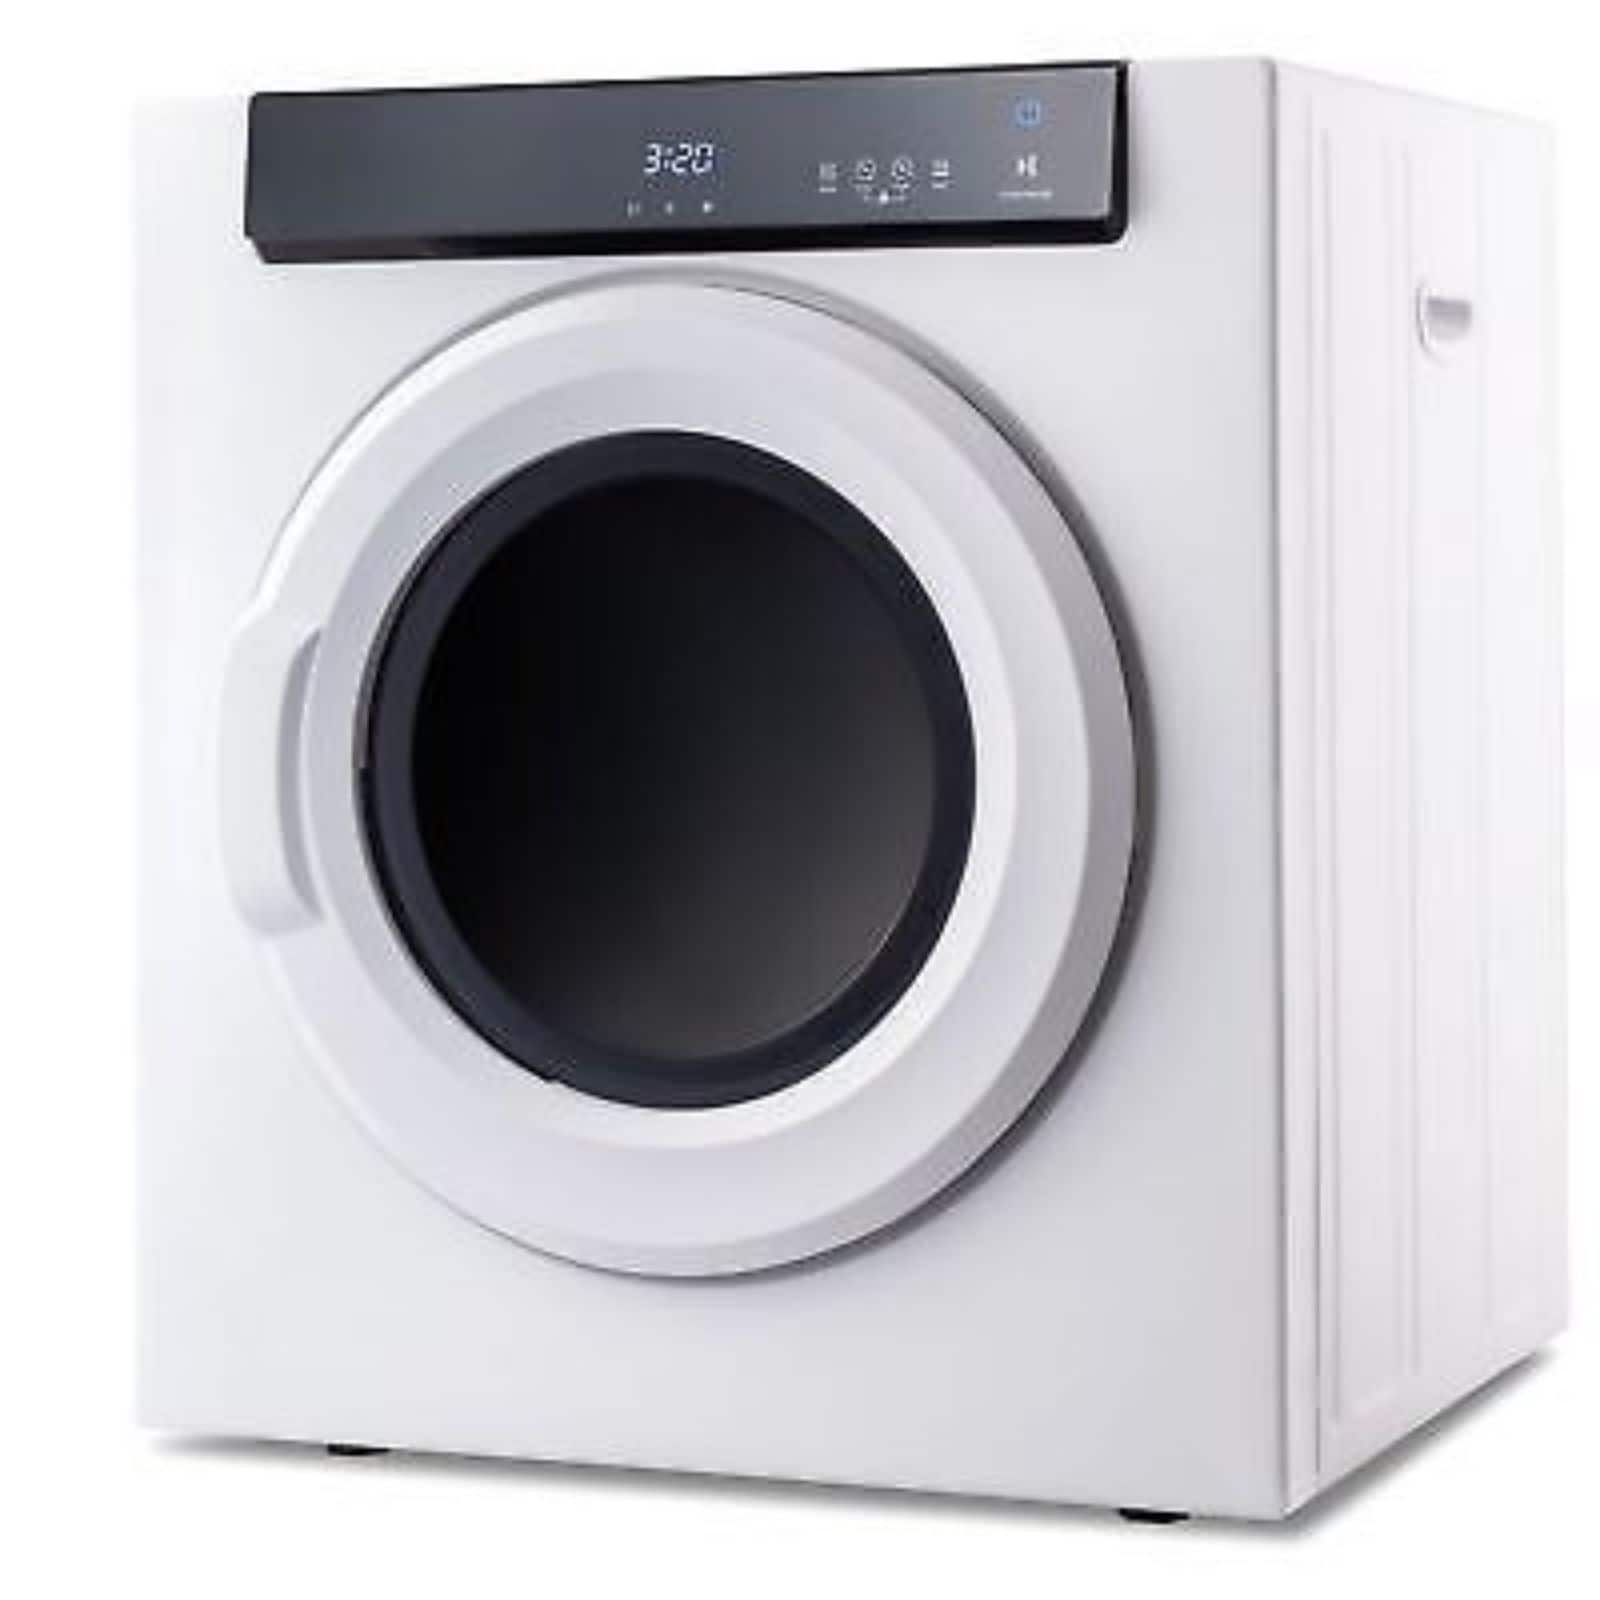 https://ak1.ostkcdn.com/images/products/is/images/direct/519740f0efb1db191a5ddbc1025f1b437486fd1e/Electric-Portable-Clothes-Dryer%2C-Front-Load-Laundry-Dryer.jpg